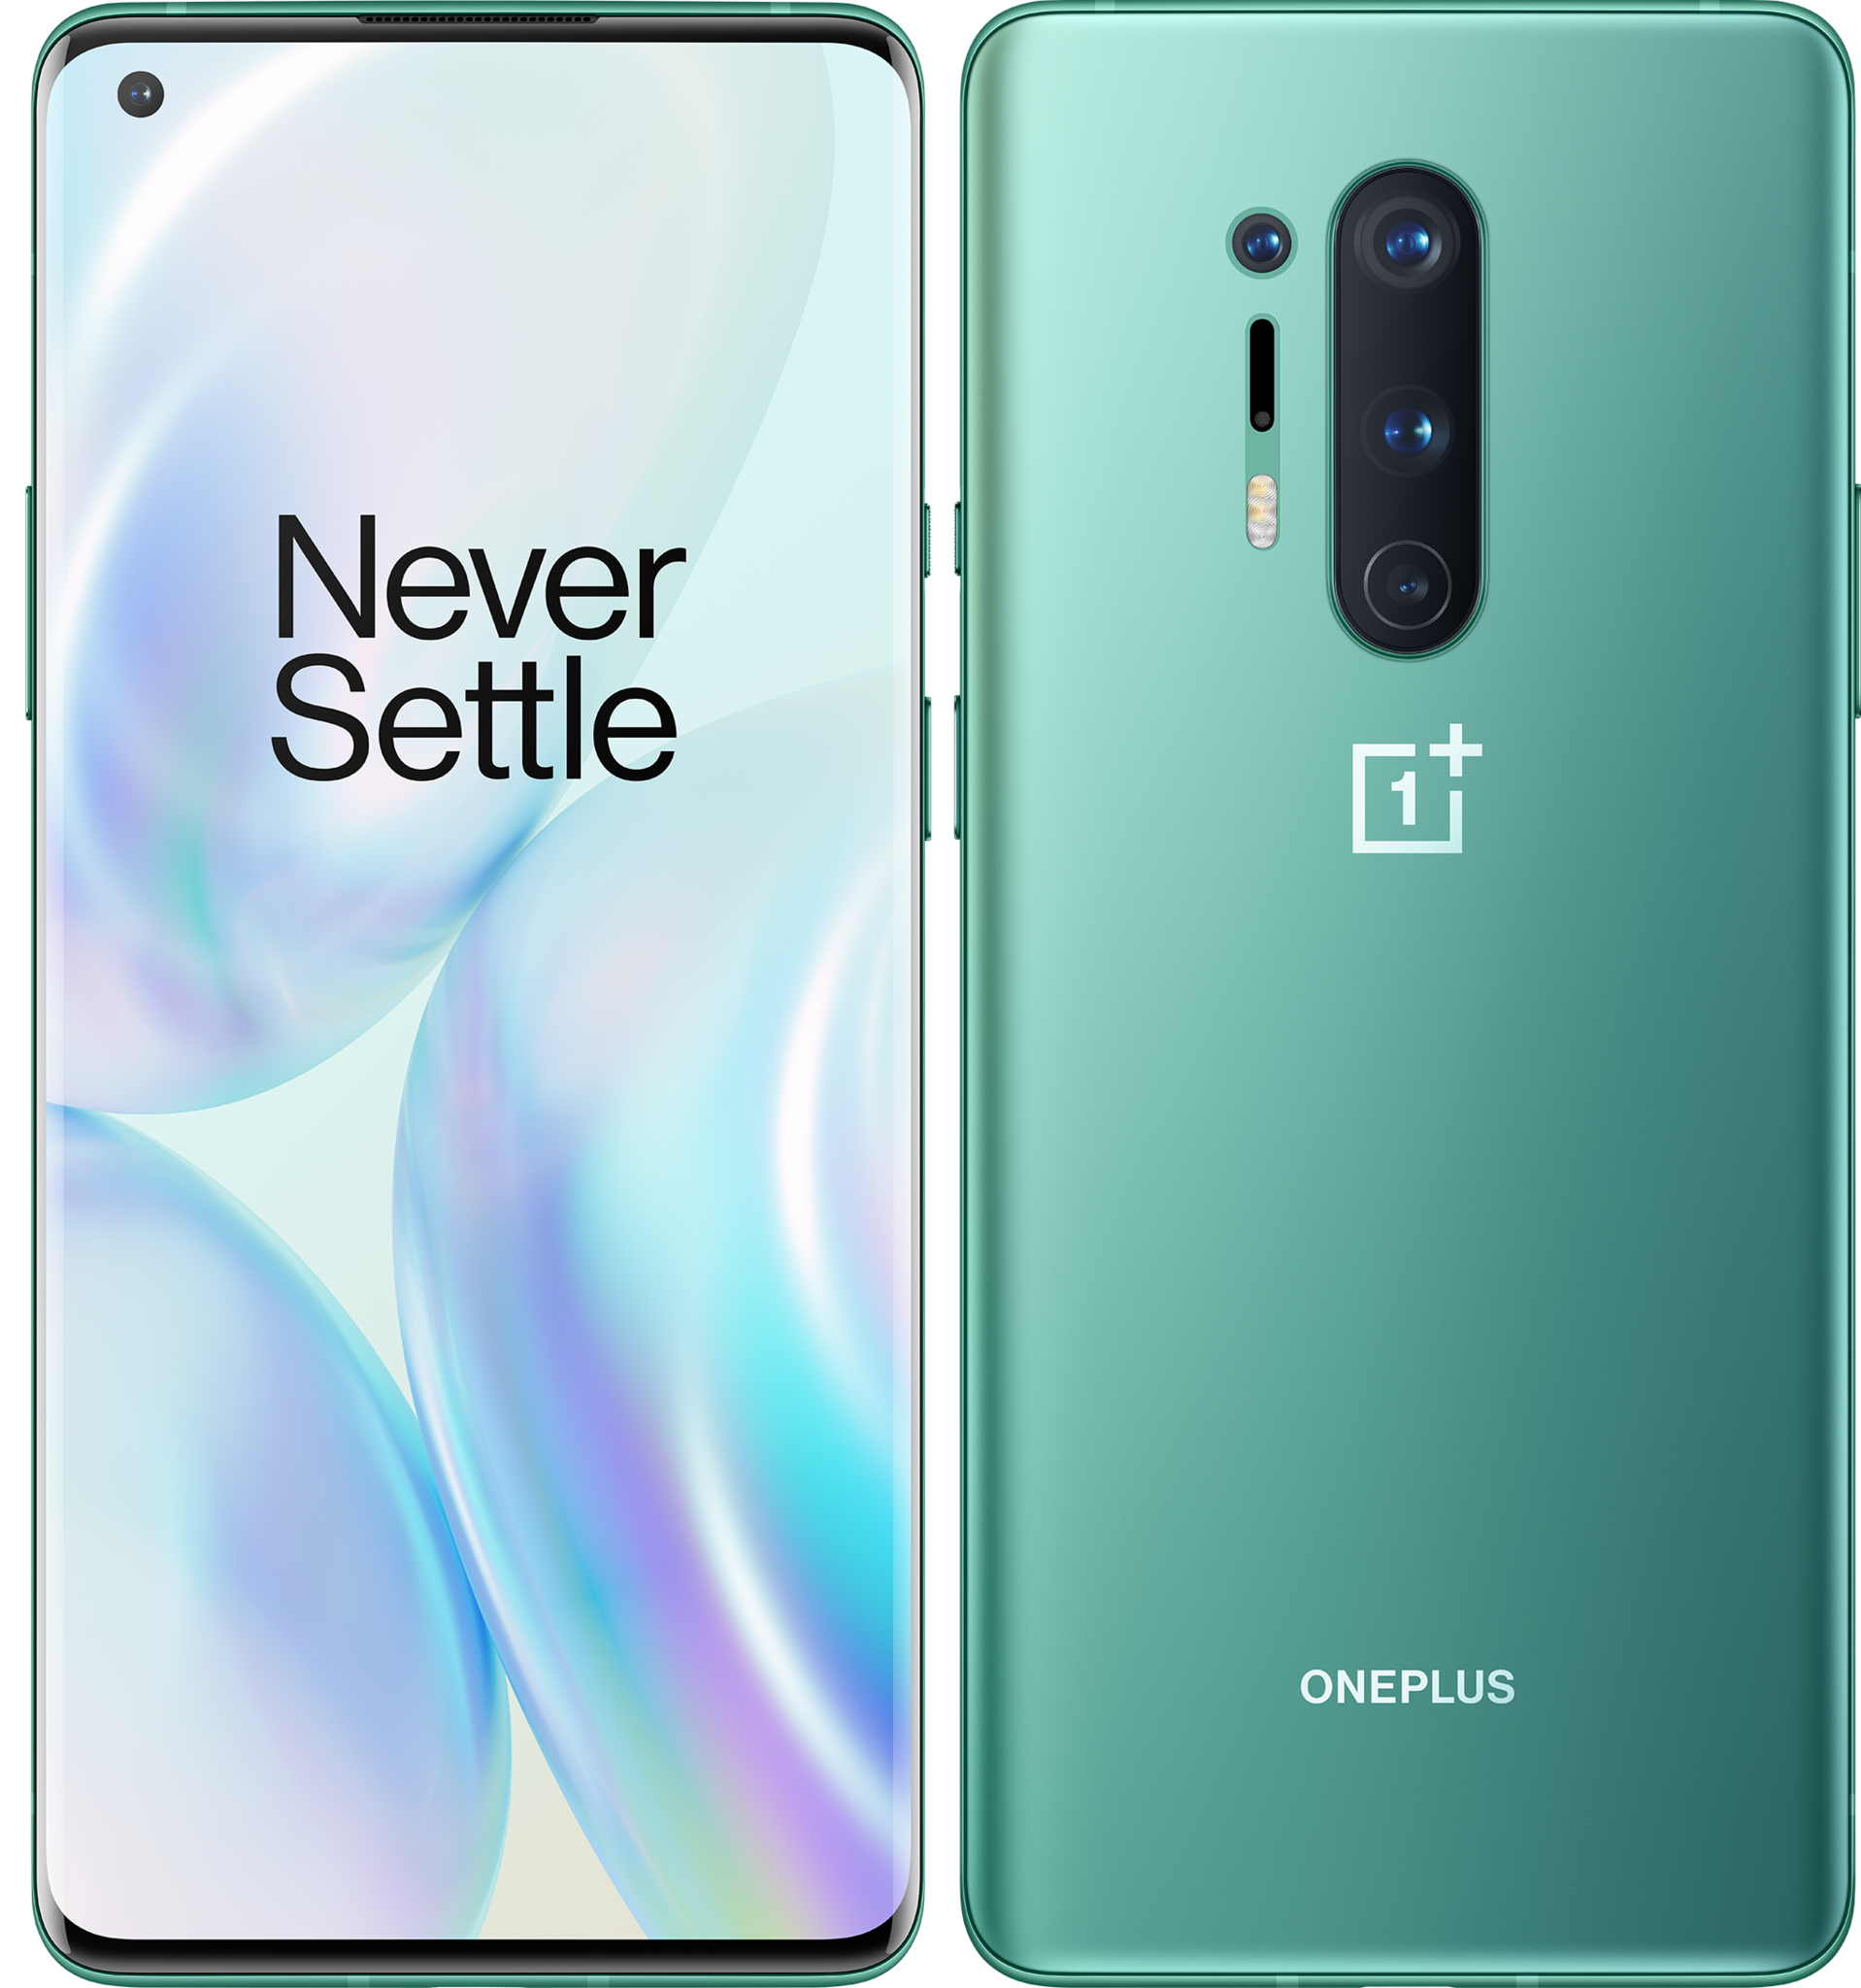 https://www.androidcentral.com/sites/androidcentral.com/files/styles/small/public/article_images/2020/04/oneplus-8-pro-render-official.png?itok=WAPNdMVF